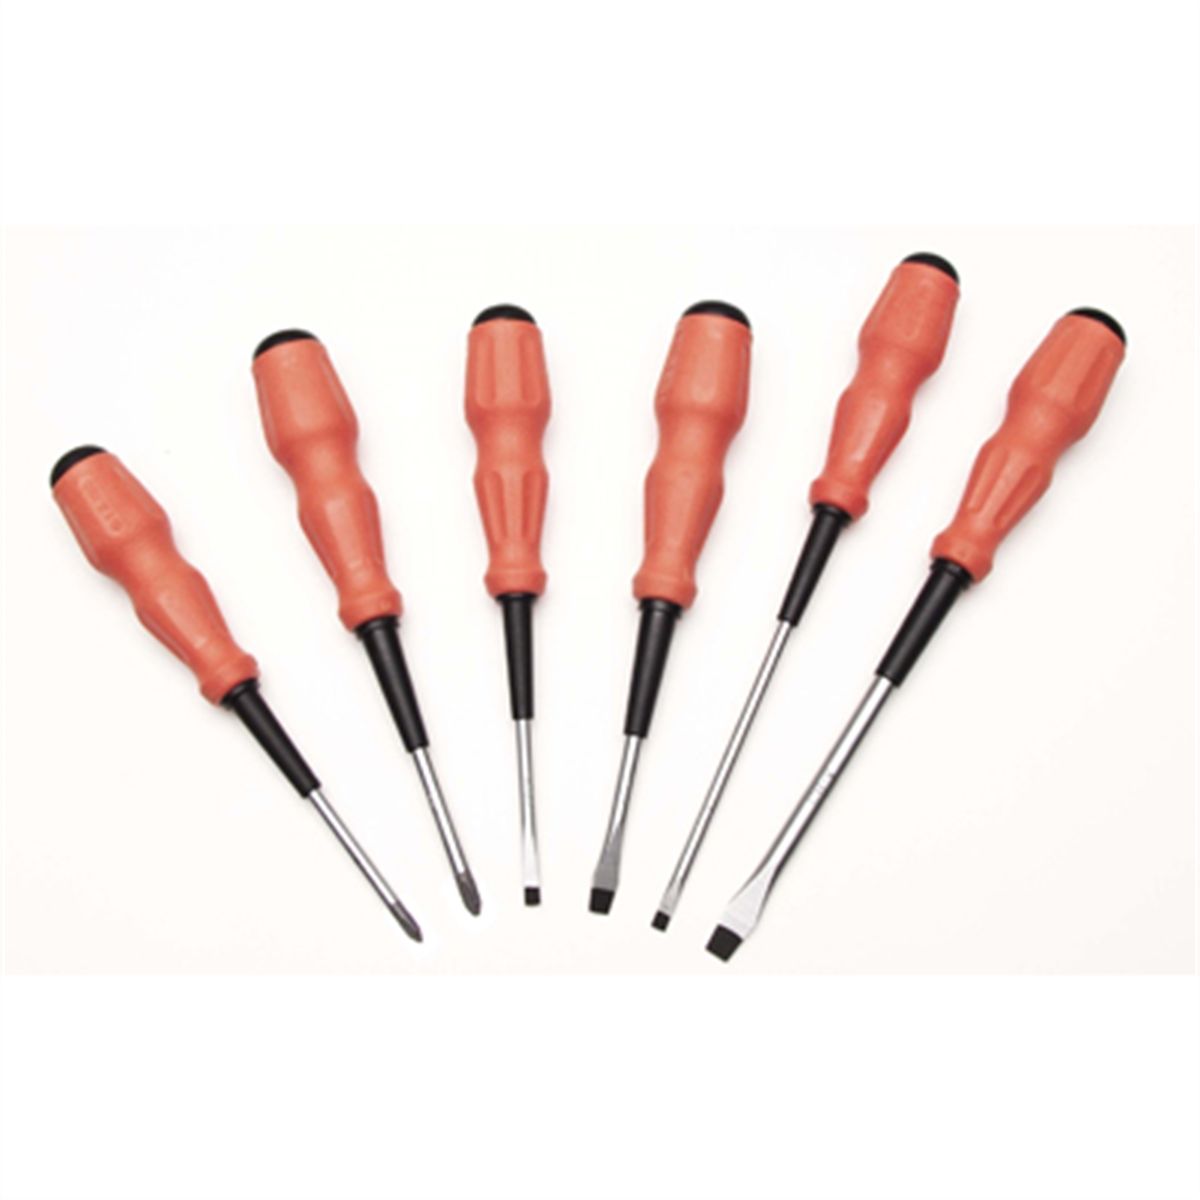 phillips p0 and p1 screwdrivers